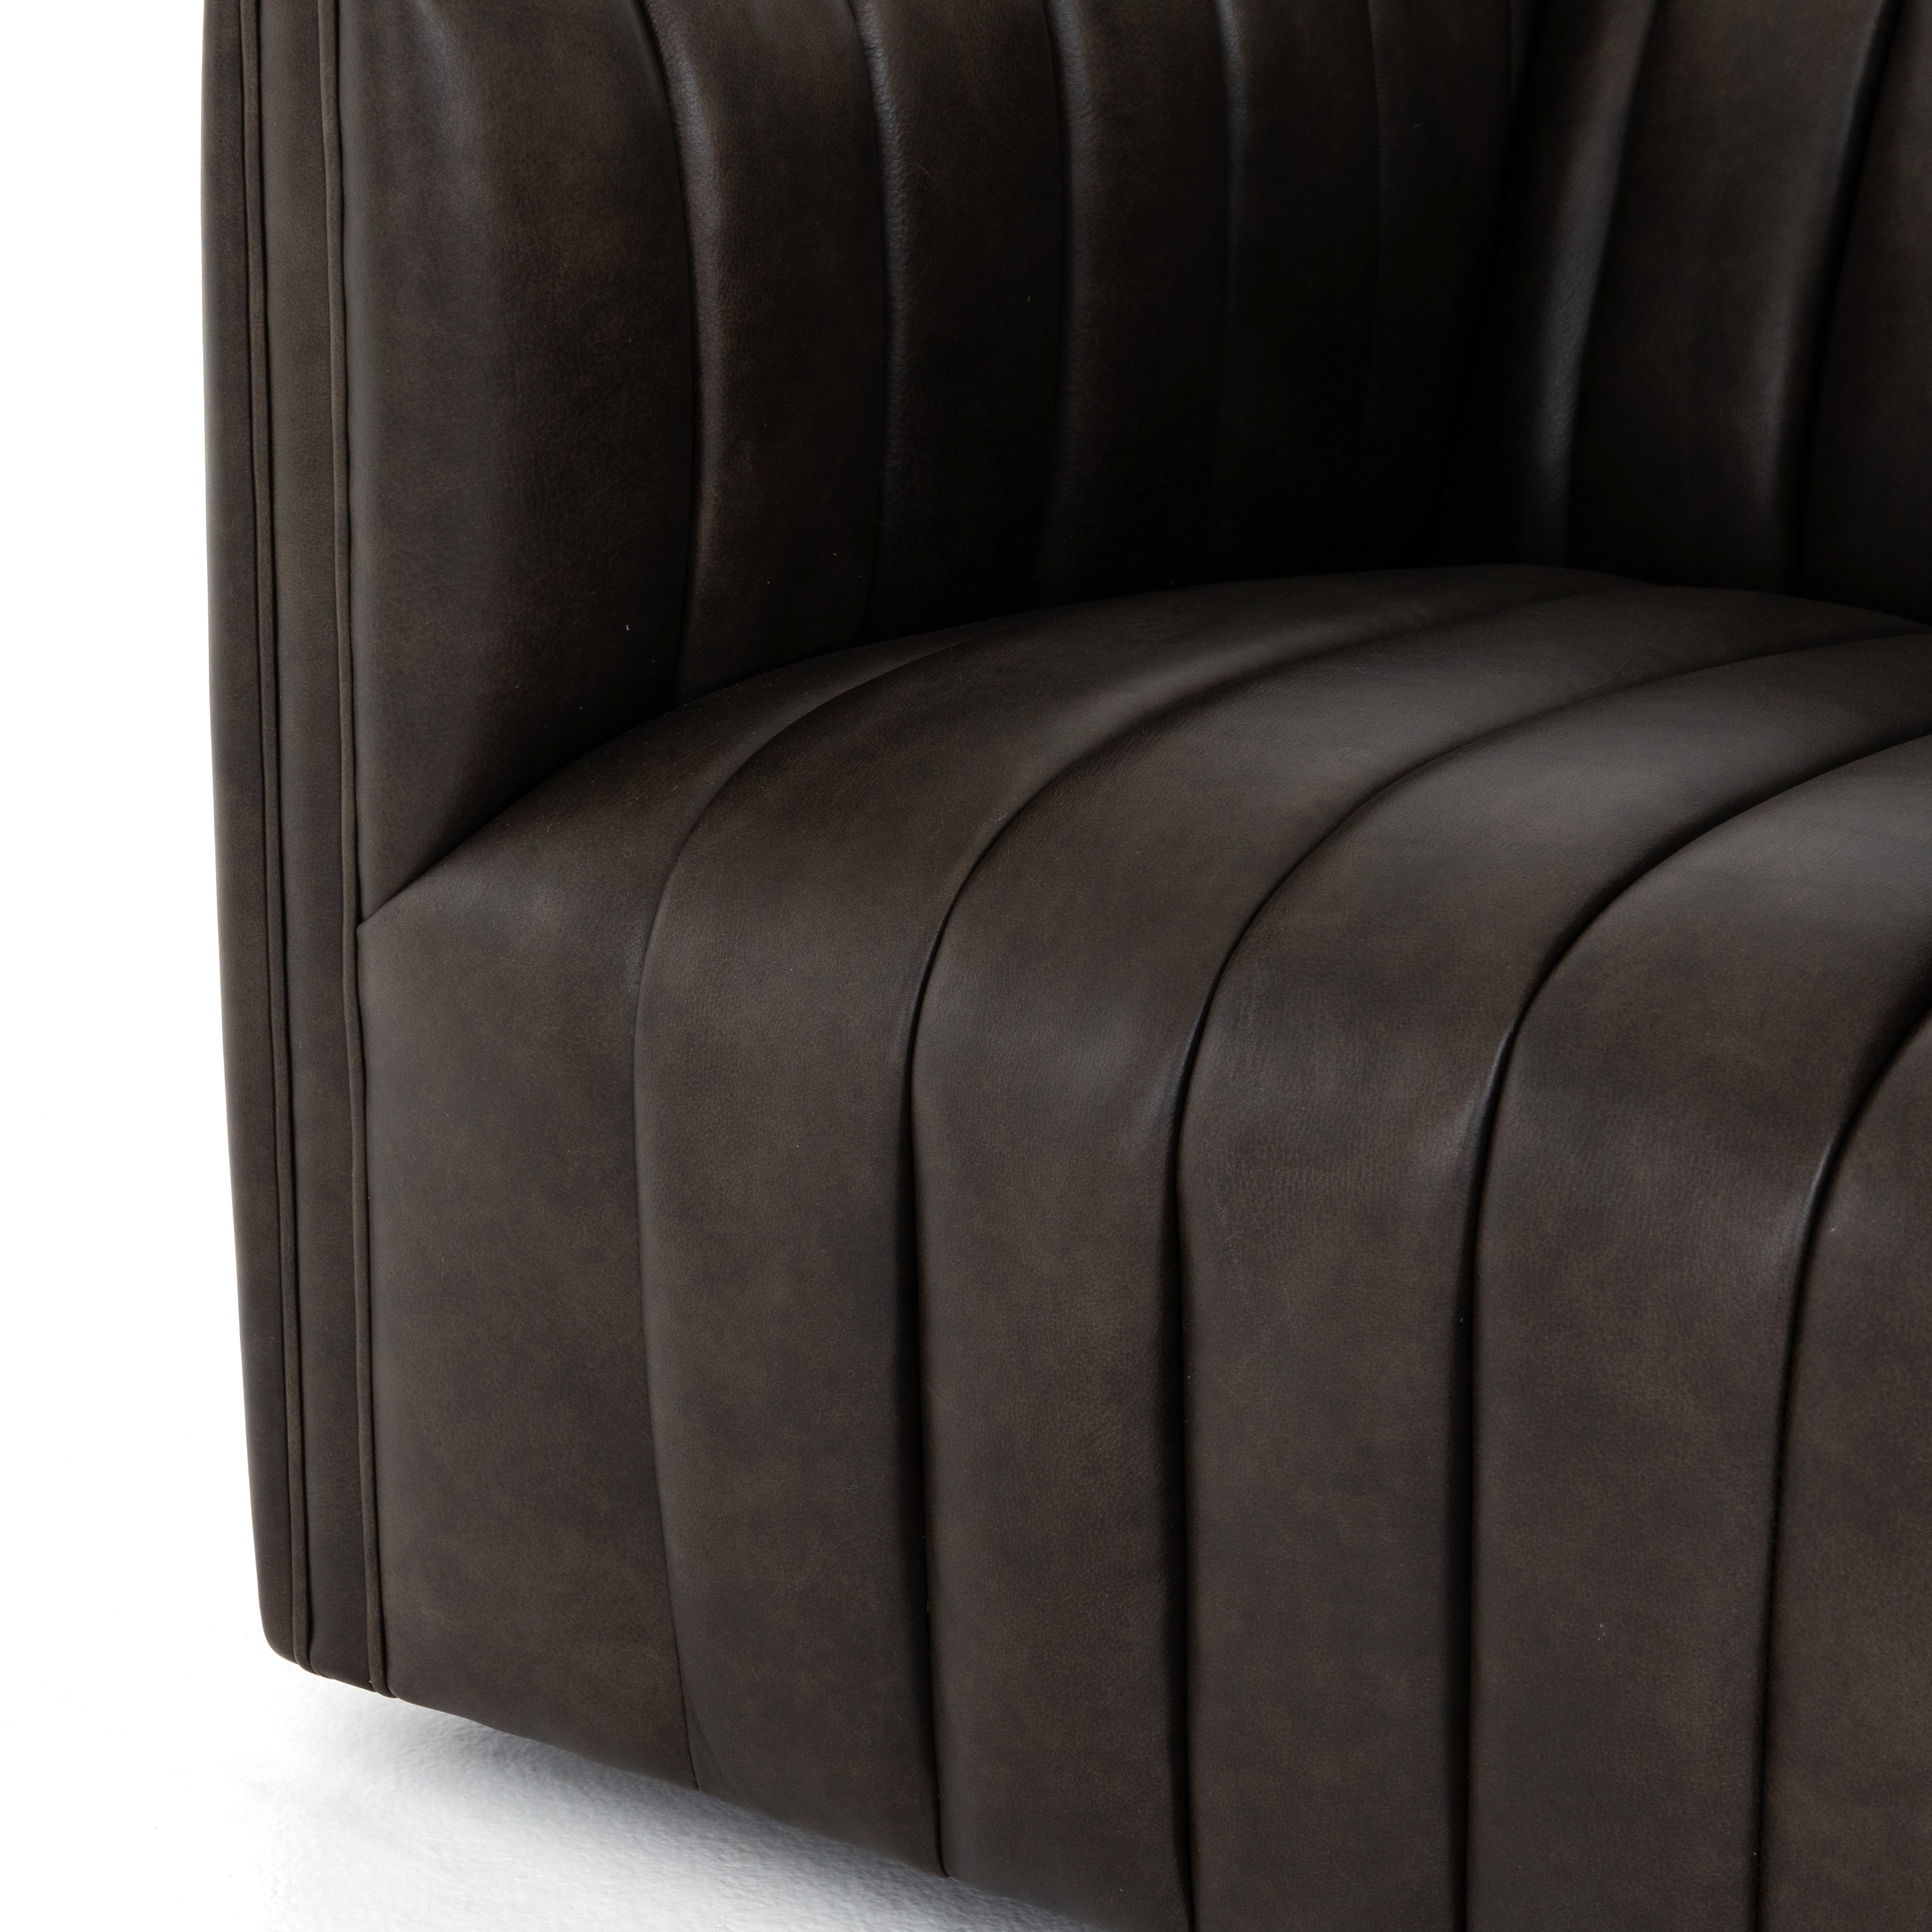 You will love the dramatic channeling and deep brown hue of this Augustine Deacon Wolf Swivel Chair. The swivel feature sets this apart from other chairs and is a great choice for any living room or media room. This chair is comfort wrapped in soft leather making this everyone's favorite chair.